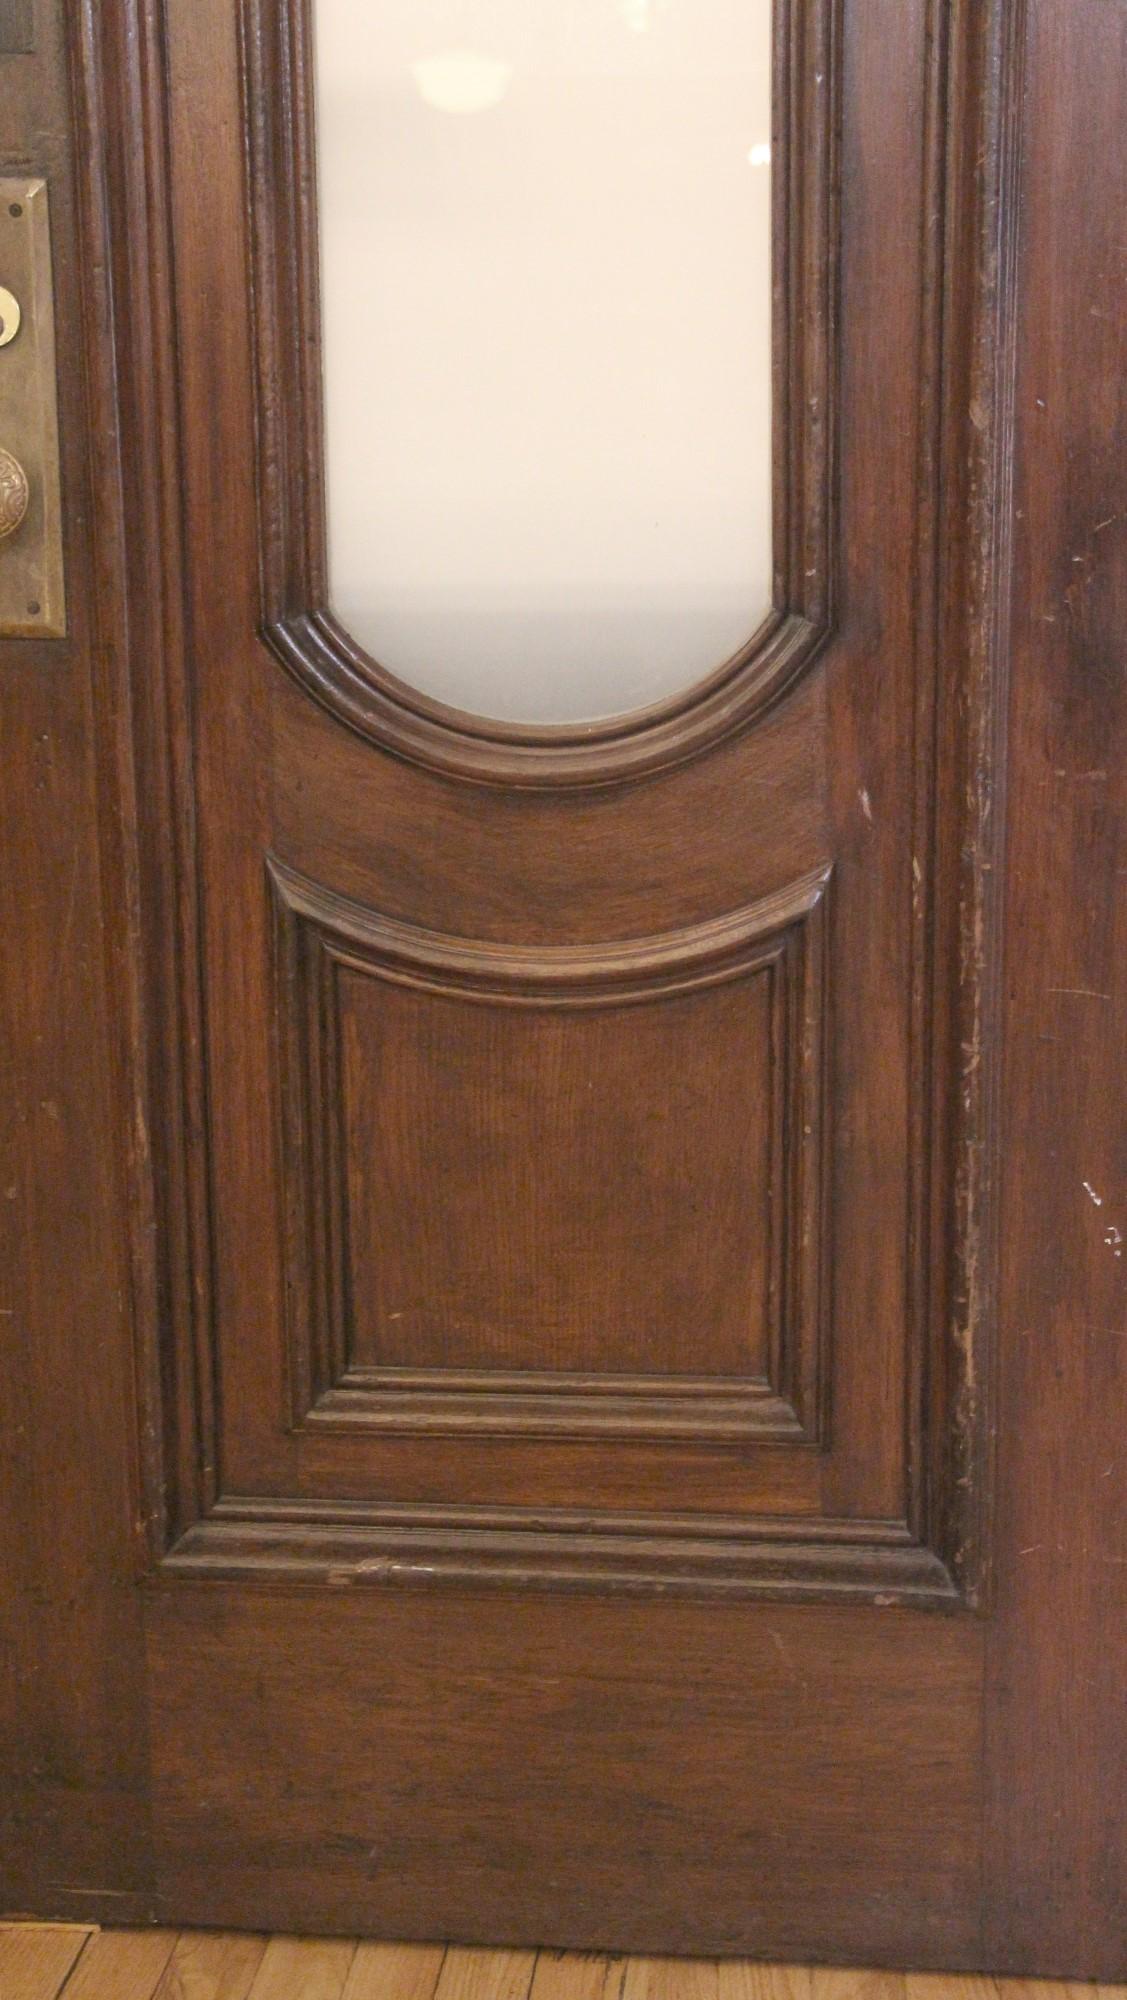 Late 19th Century 1880s Arched Walnut Brownstone Entry Double Doors with Frosted Glass & Hardware